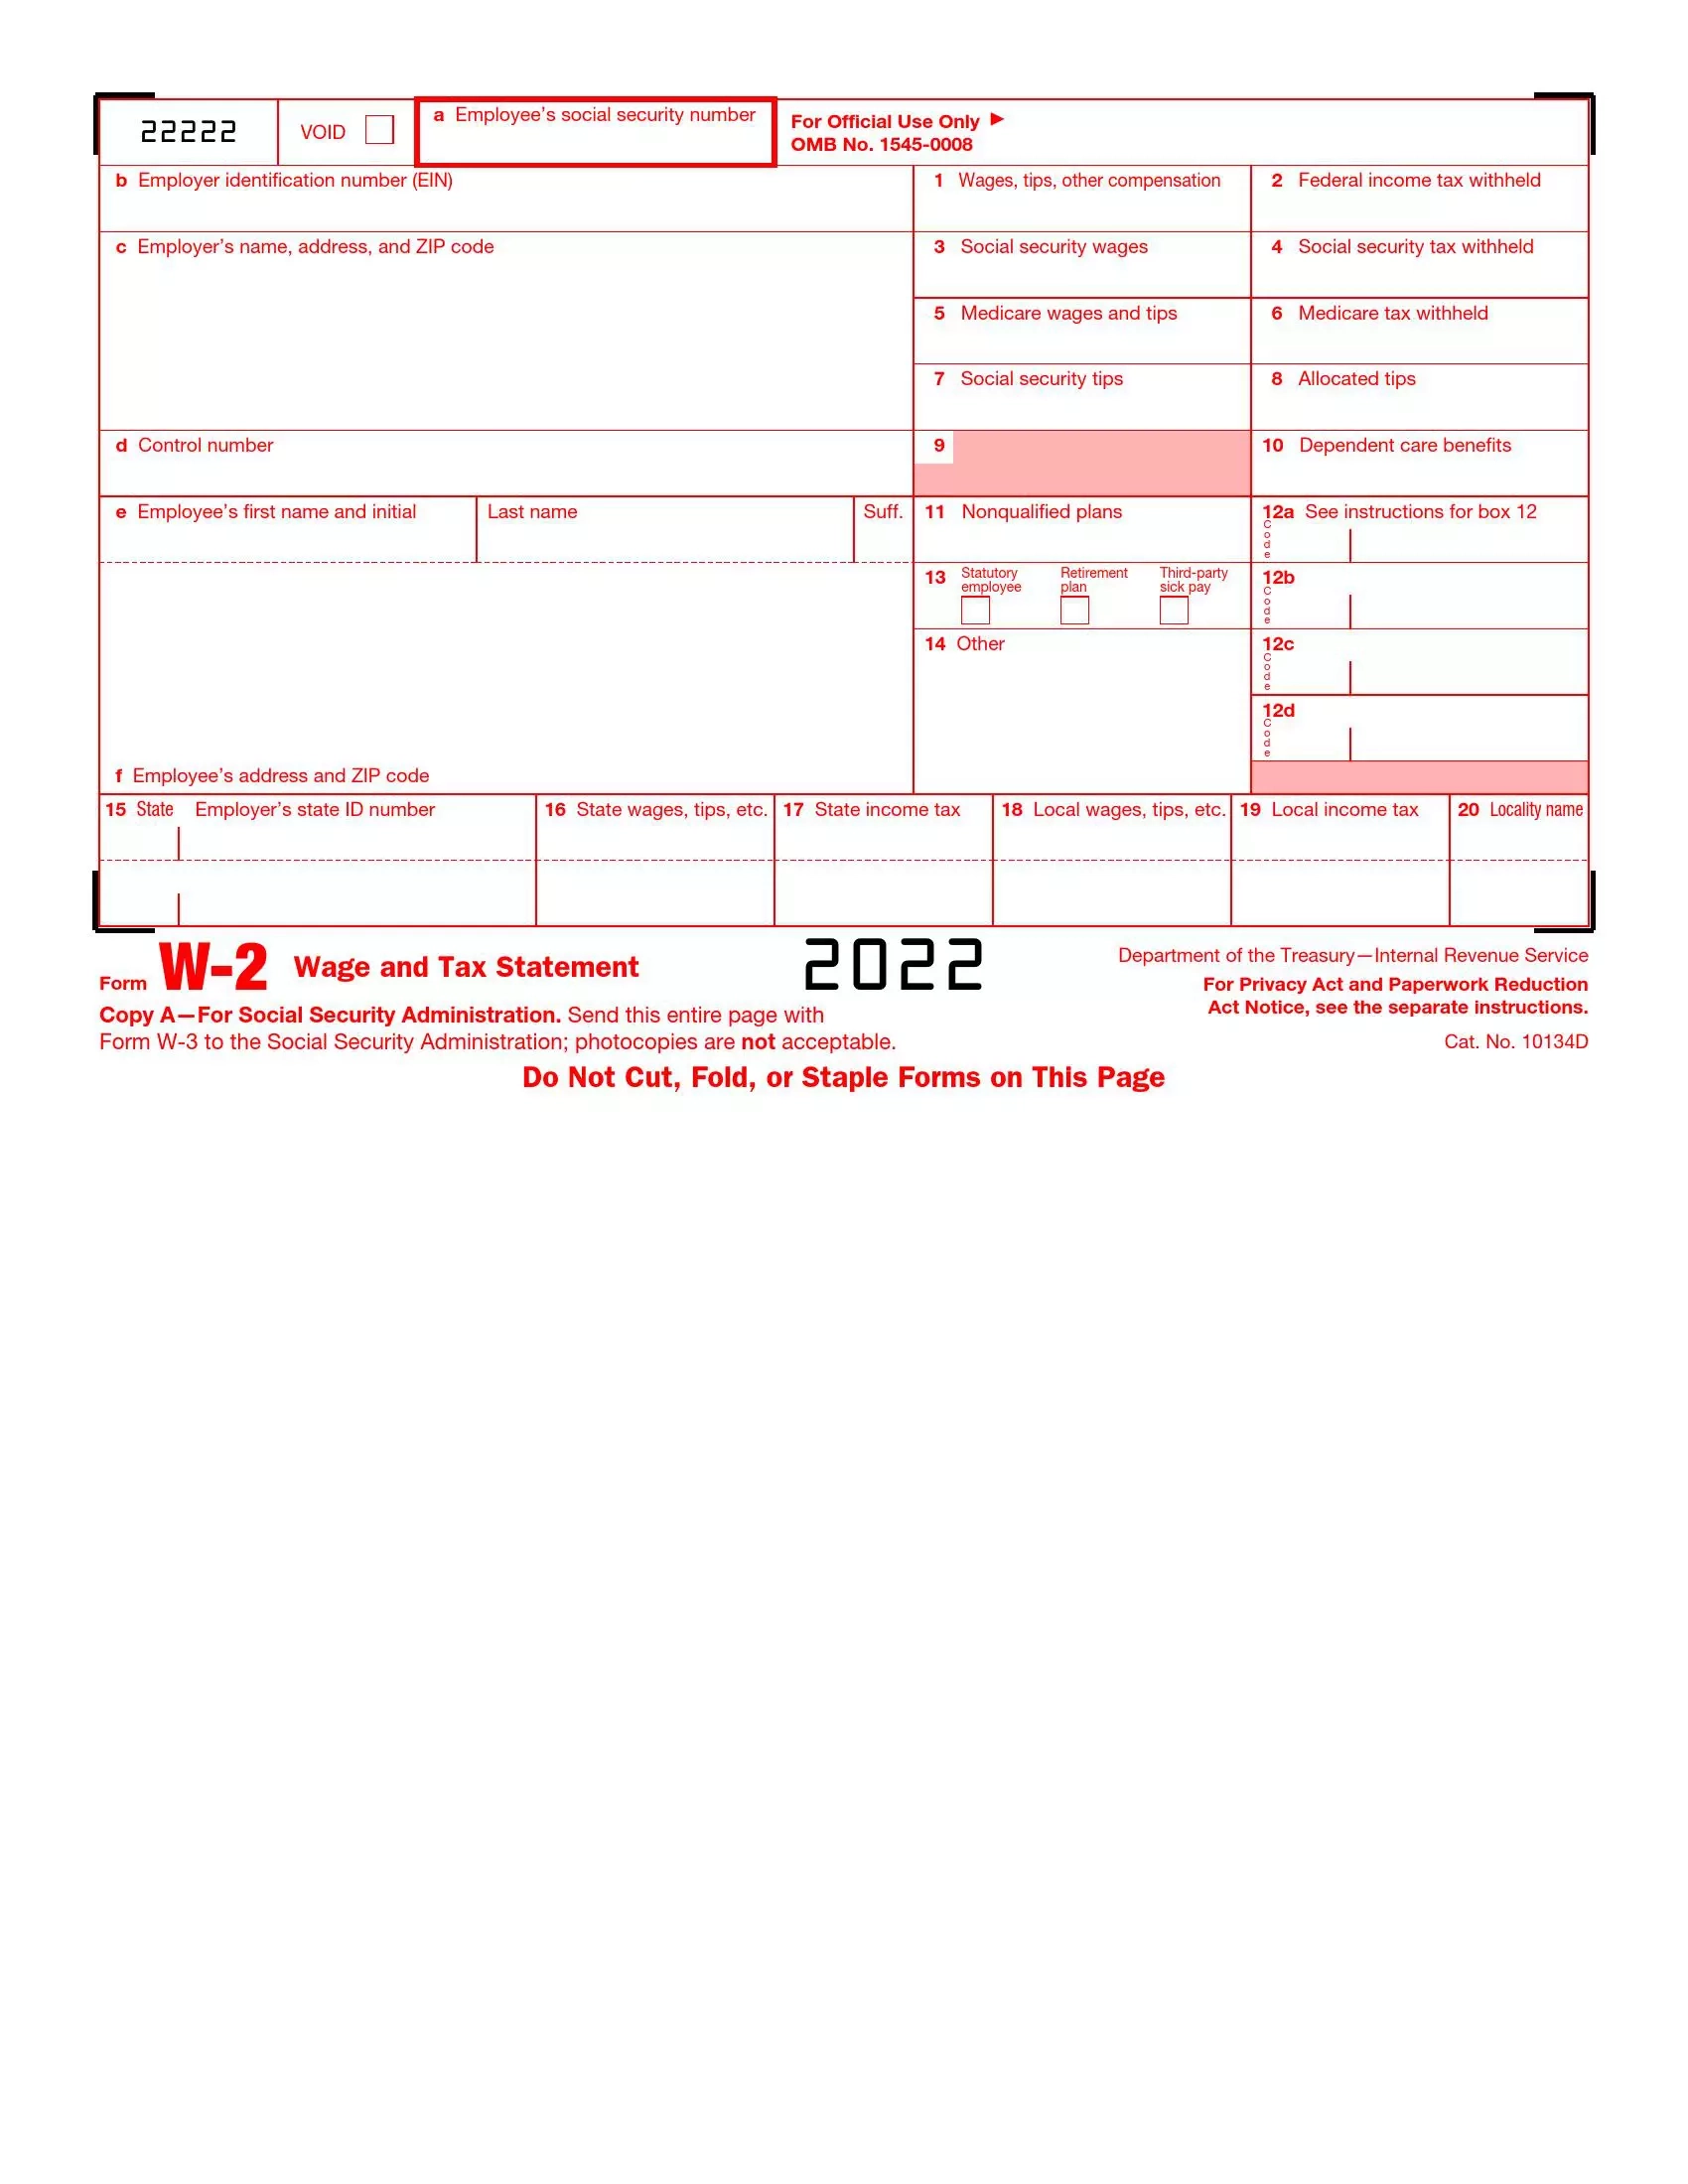 Irs Form W-2 ≡ Fill Out Printable Pdf Forms Online within How To Print Out W2 Forms